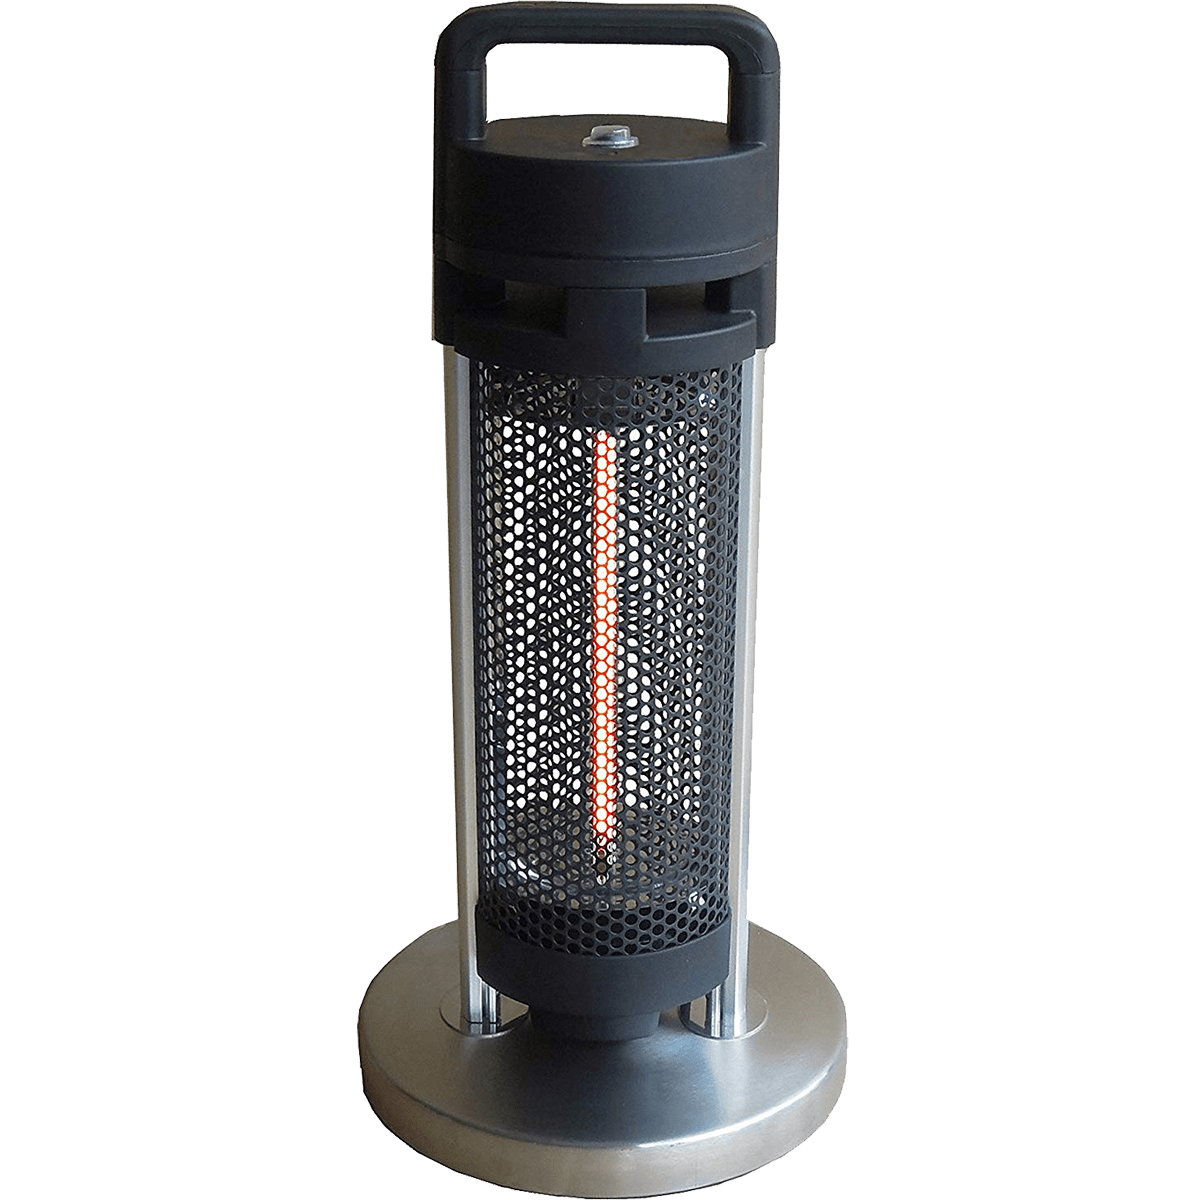 Portable Infrared Heaters - An Introduction To Infrared Heaters